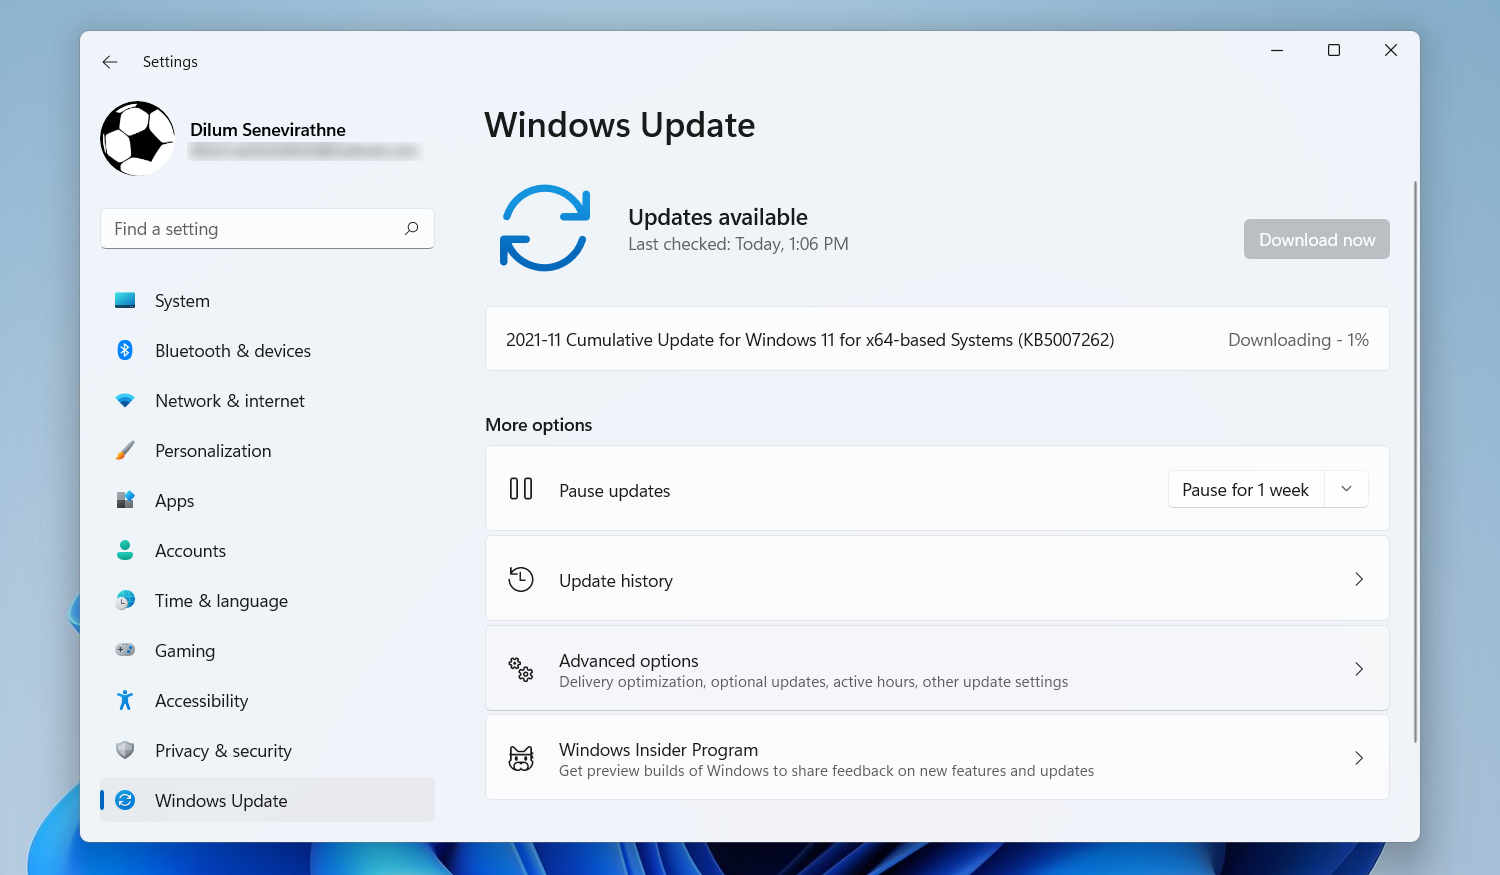 Updating the system Windows software on a PC